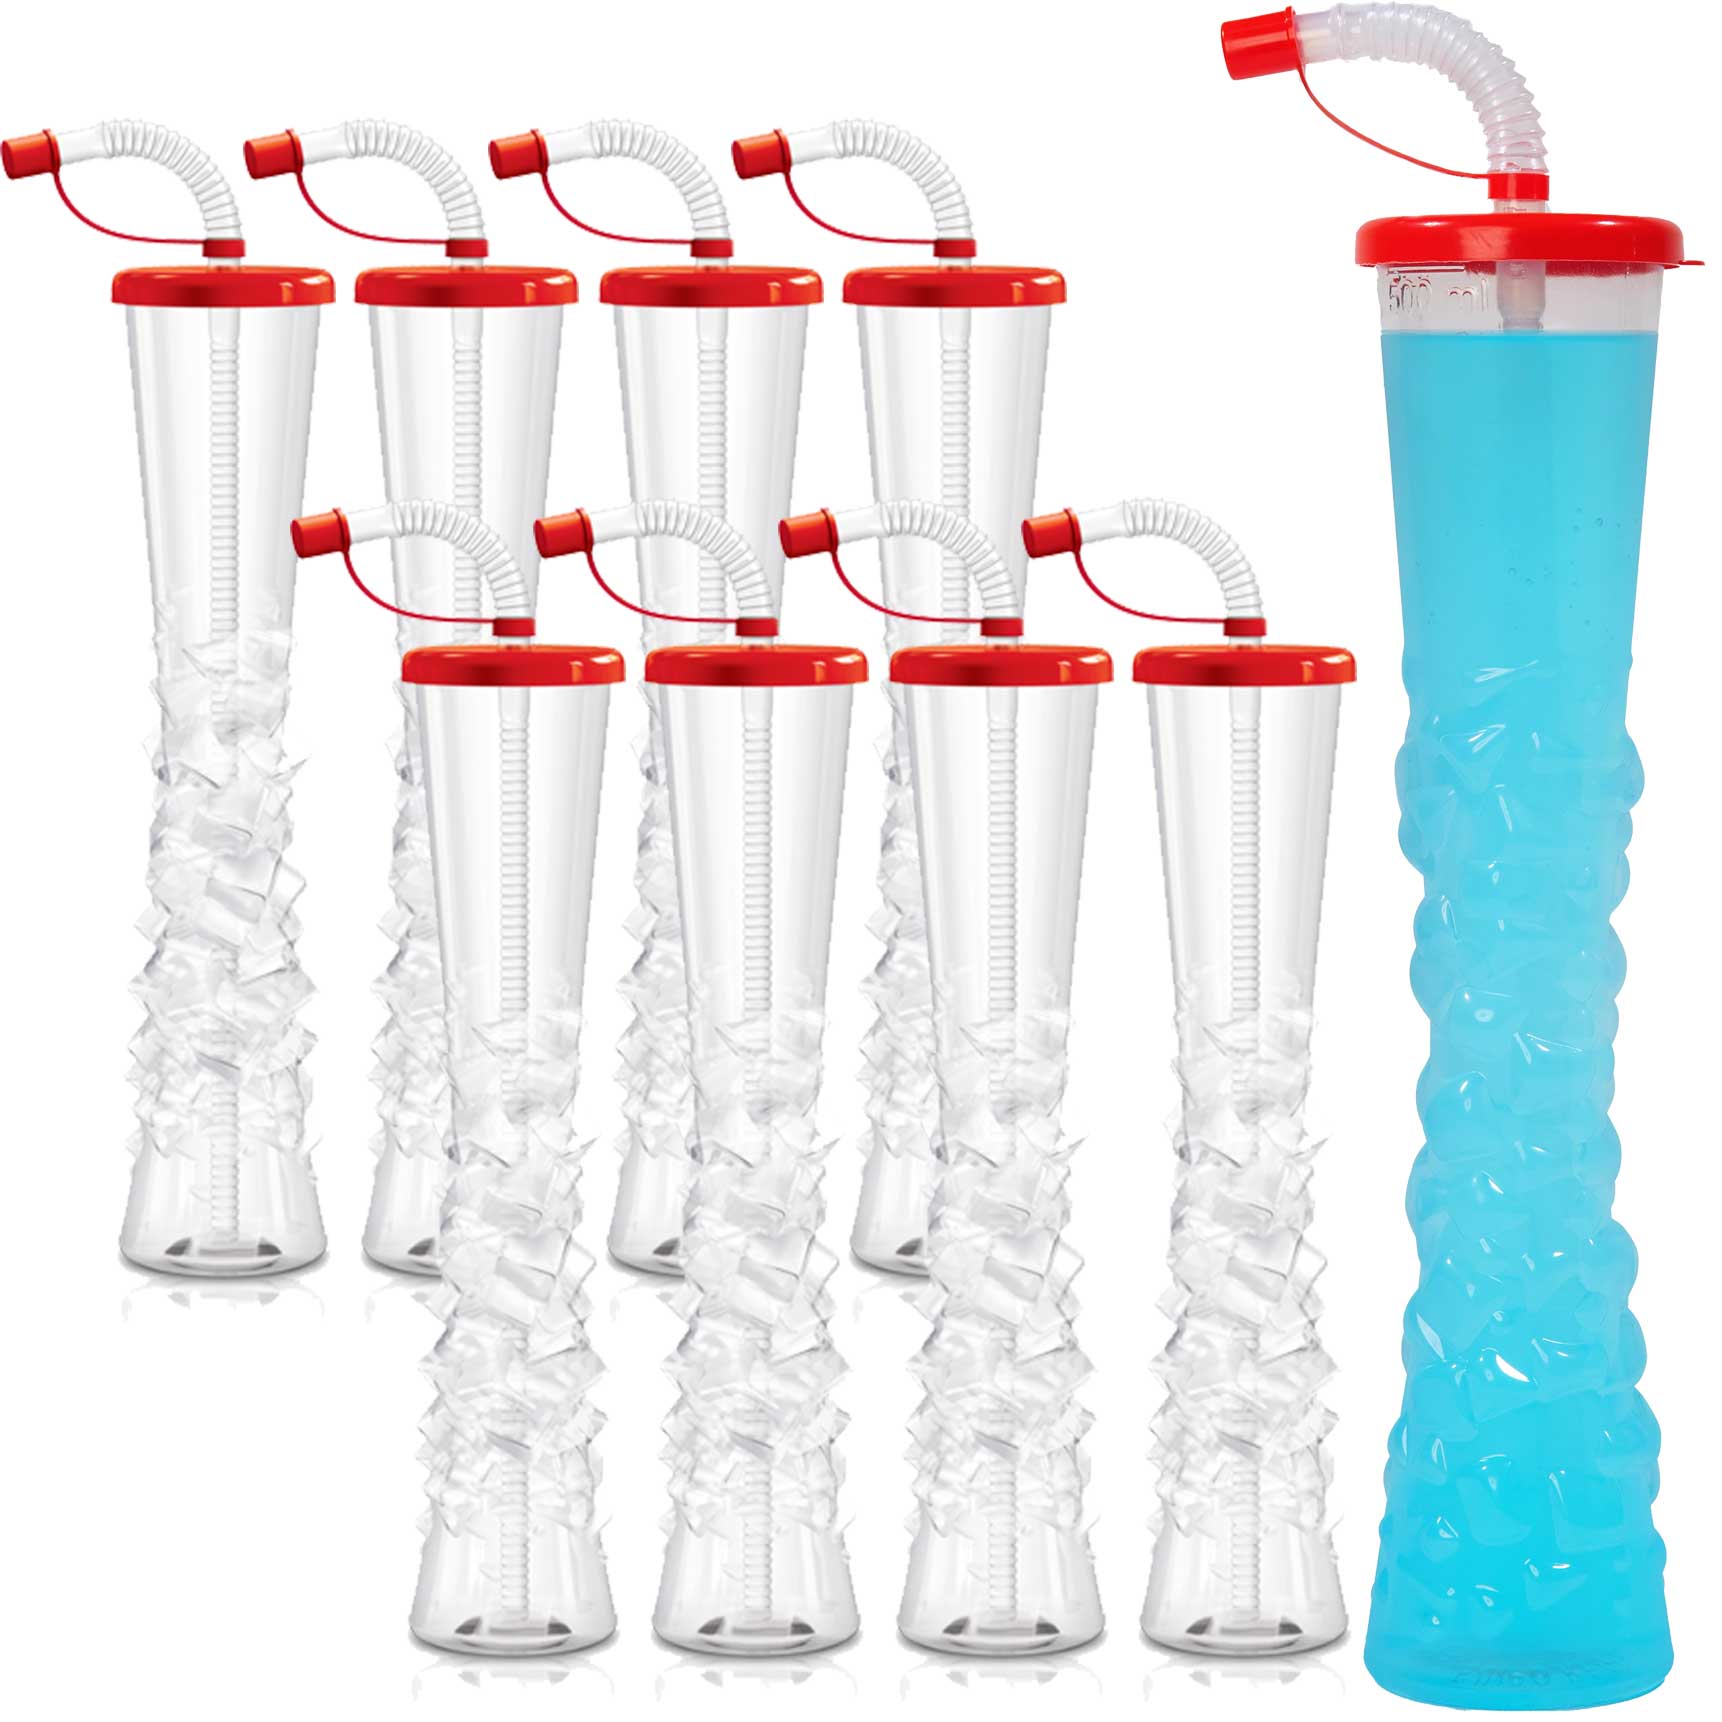 http://noveltycupsusa.com/cdn/shop/files/sweet-world-usa-yard-cups-ice-yard-cups-54-cups-red-for-margaritas-and-frozen-drinks-kids-parties-17oz-500ml-sw-57351-cups-with-lids-and-straws-35524169269407.jpg?v=1684776576